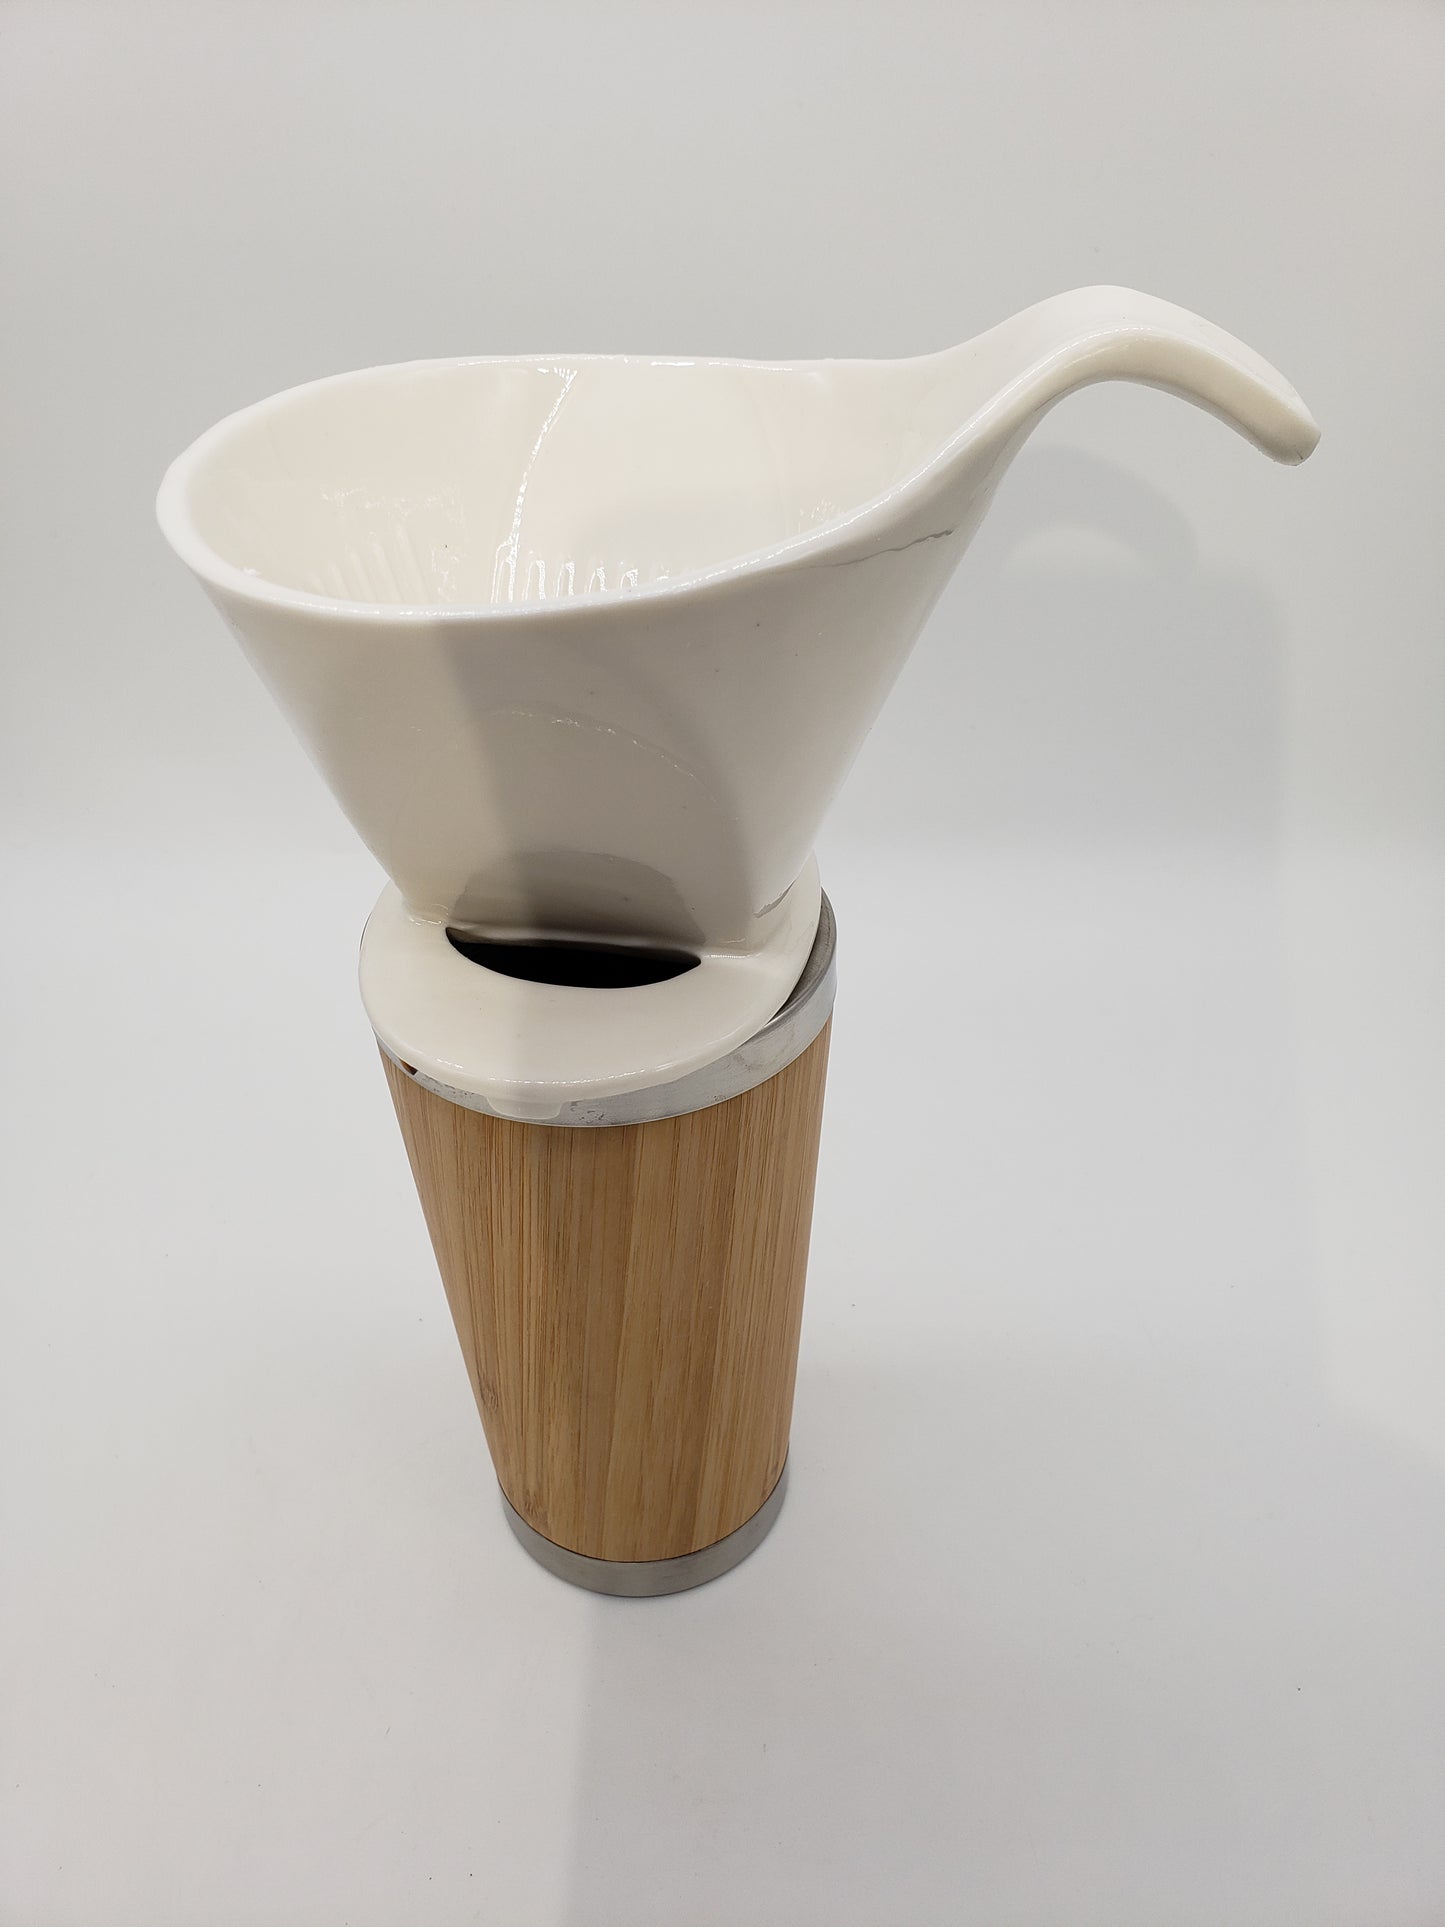 This is a white, shiny, smooth ceramic, cone shaped dripper sitting on top of a bamboo travel mug.  The dripper has an ergonomic handle for an easy grip between finger and thumb.  Insode the dripper is ribbed and three holes are found at the bottom inside for flow performance.  The bottom of the dripper has a base that fits on top of your mug and there is a viewing hole big enough for a finger so you can tell when it is time to stop pouring.   Mug not included.